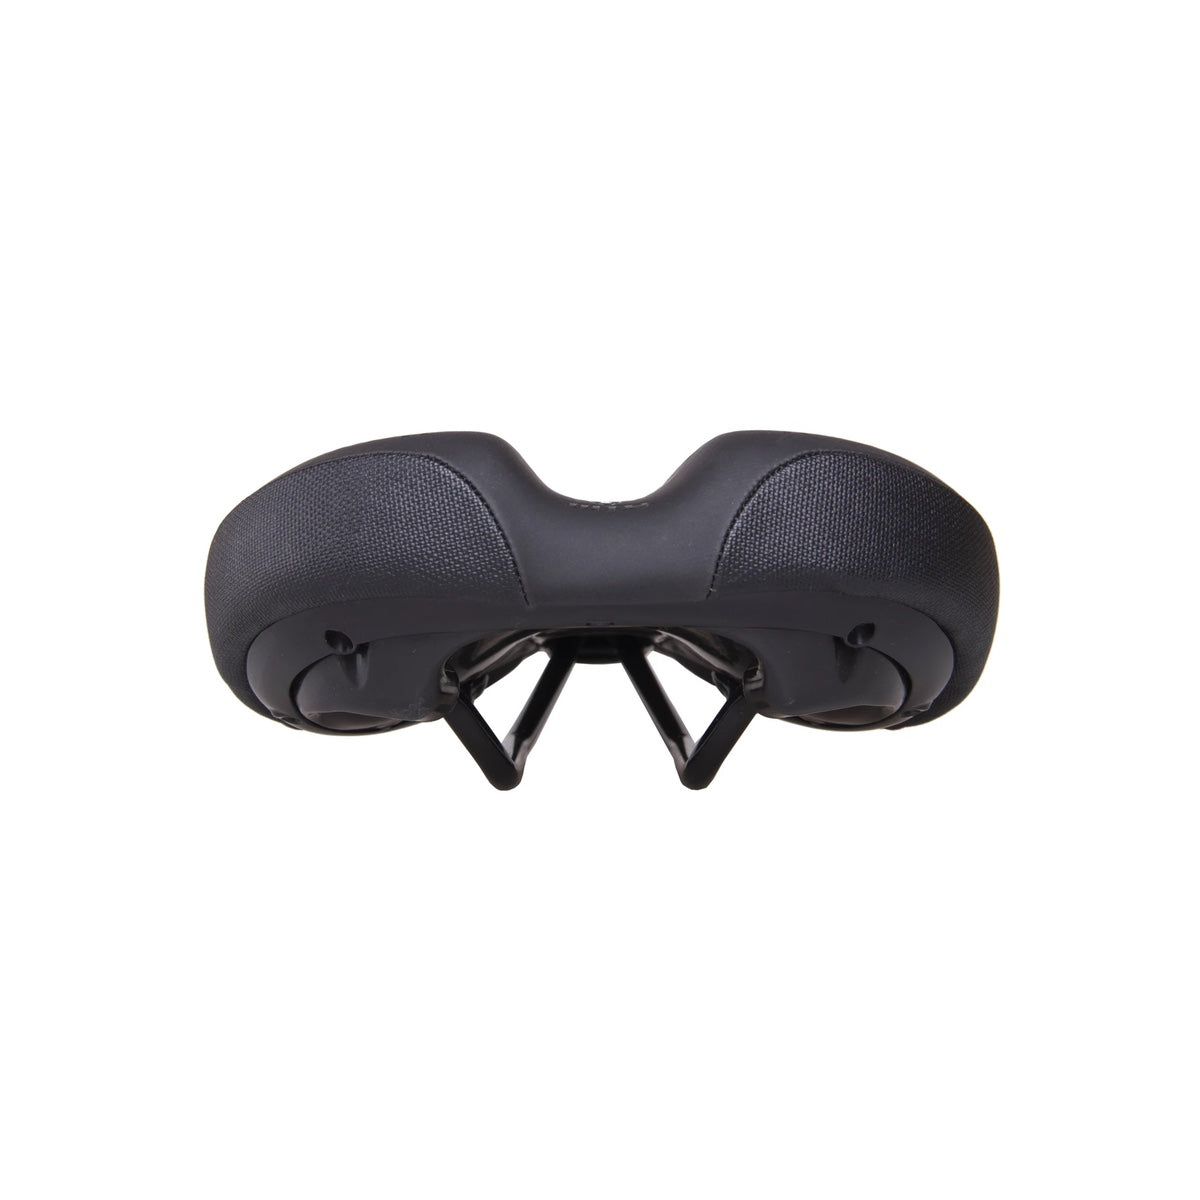 wtb-saddle-comfort-steel-wide-with-thick-padding-174x270mm-black